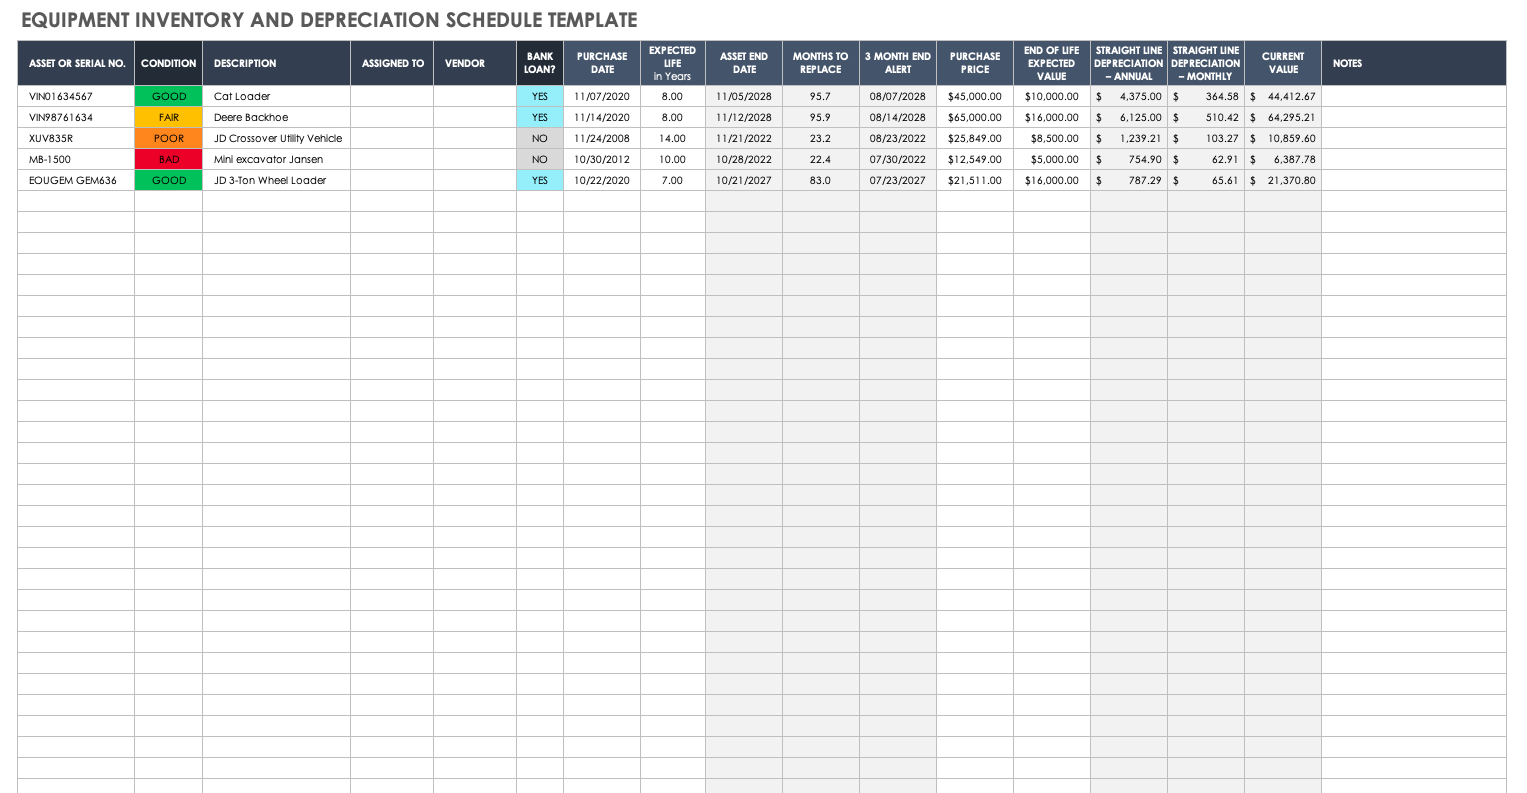 Equipment Inventory and Depreciation Schedule Template